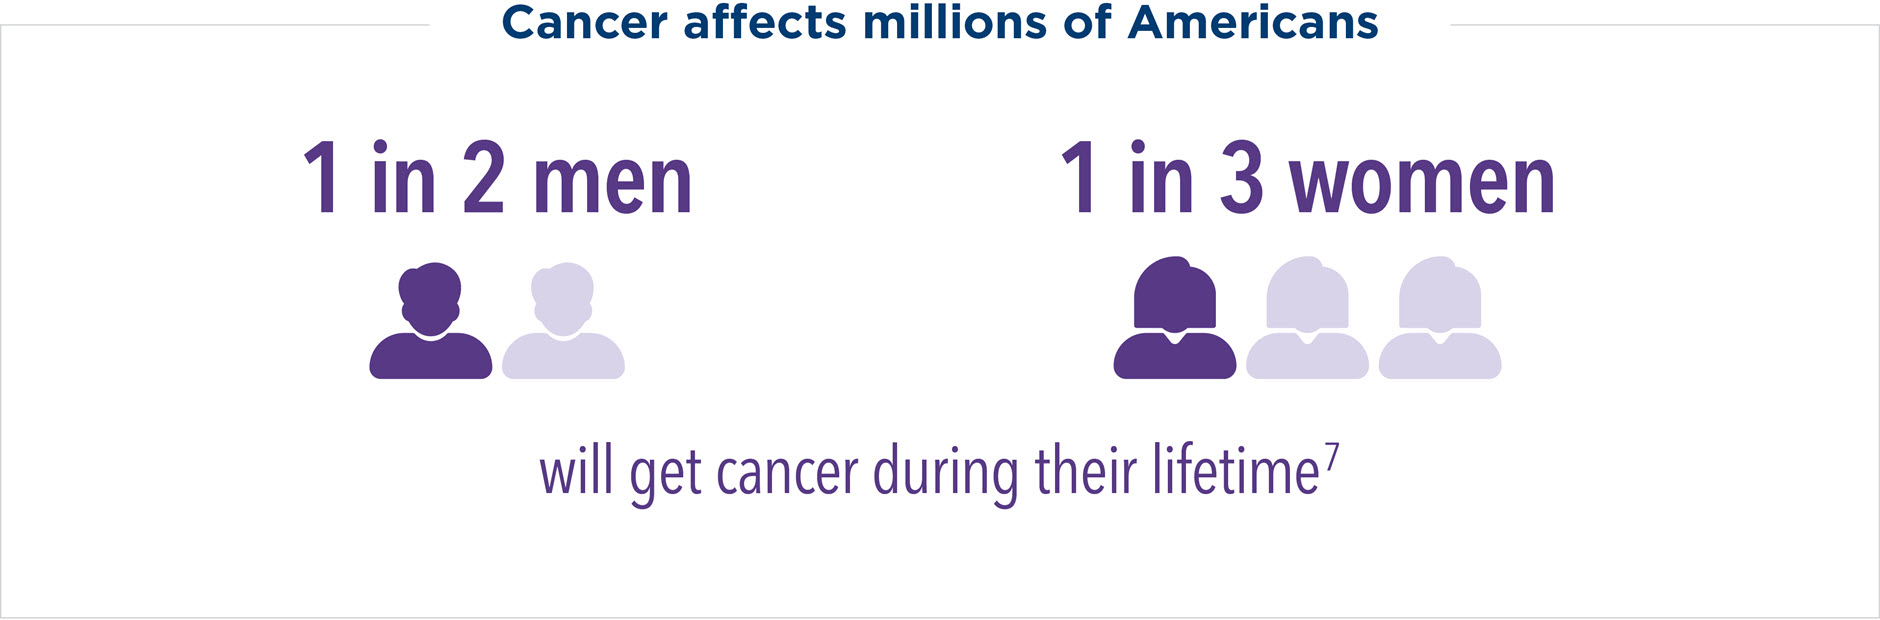 Cancer affects millions of Americans — 1 in 2 men and 1 in 3 women will get cancer during their lifetime